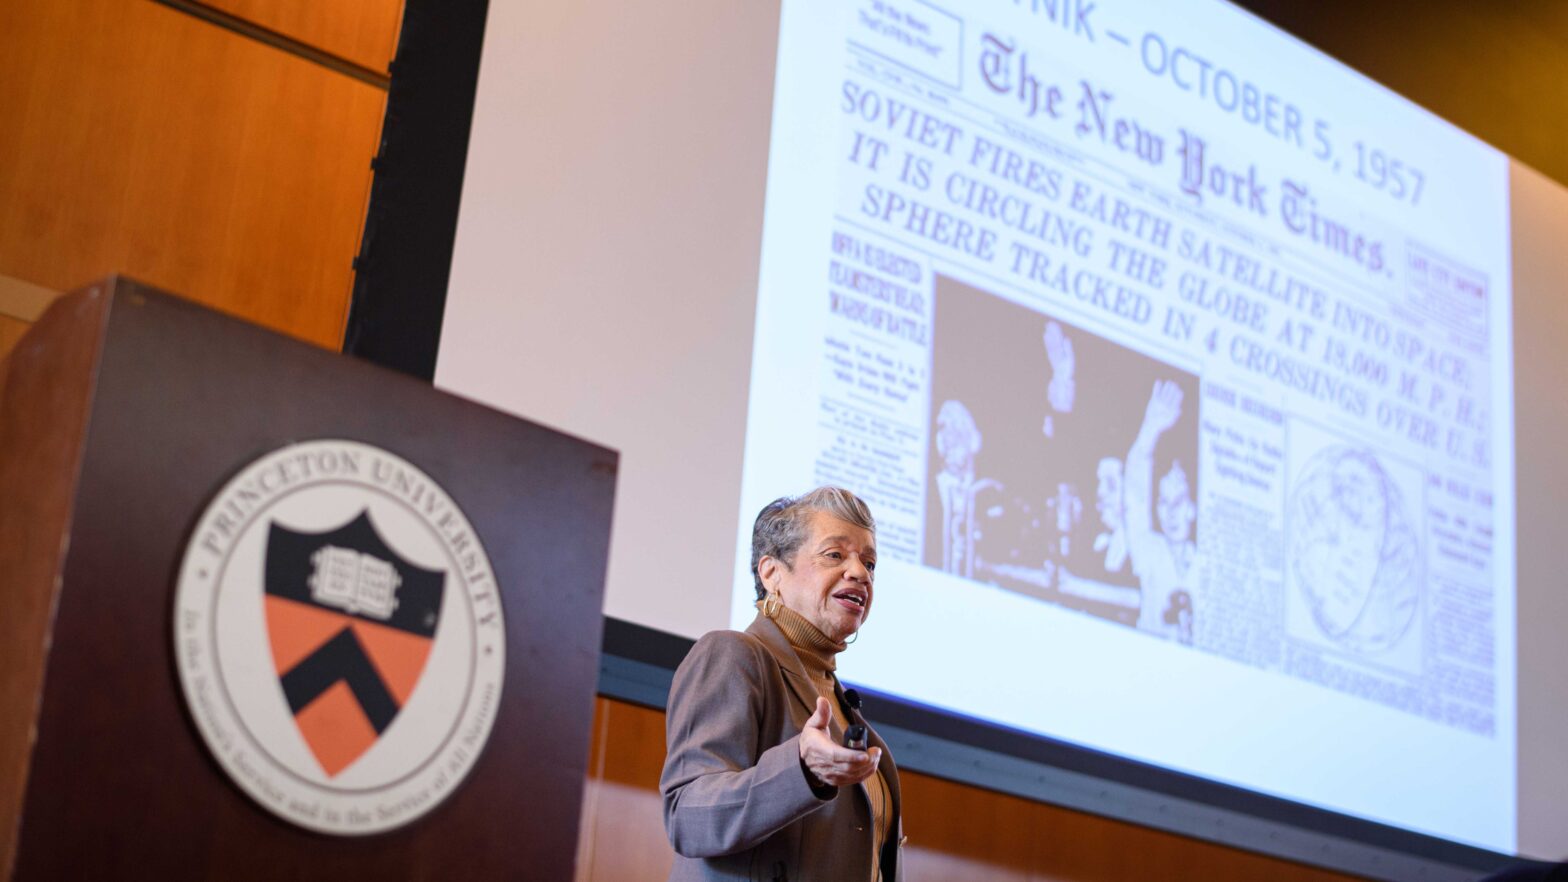 Woman speaking next to a lectern with projected slide showing front page of The New York Times